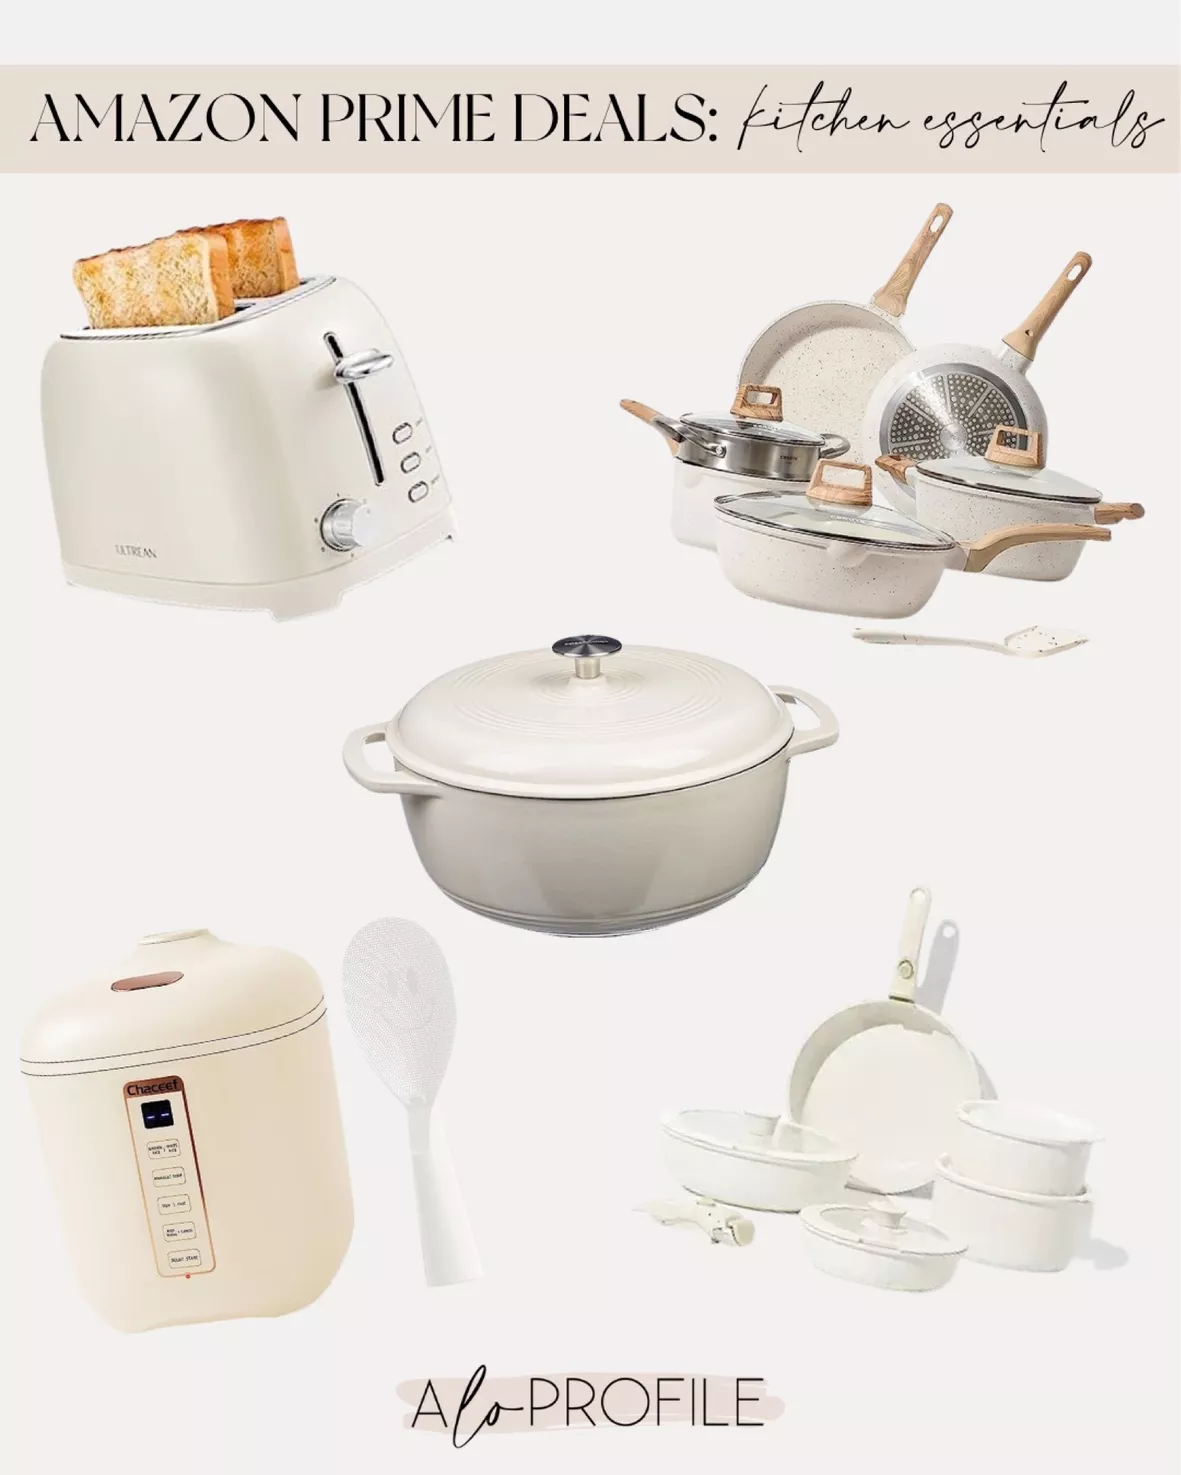  CHACEEF Mini Rice Cooker 2-Cups Uncooked, 1.2L Rice